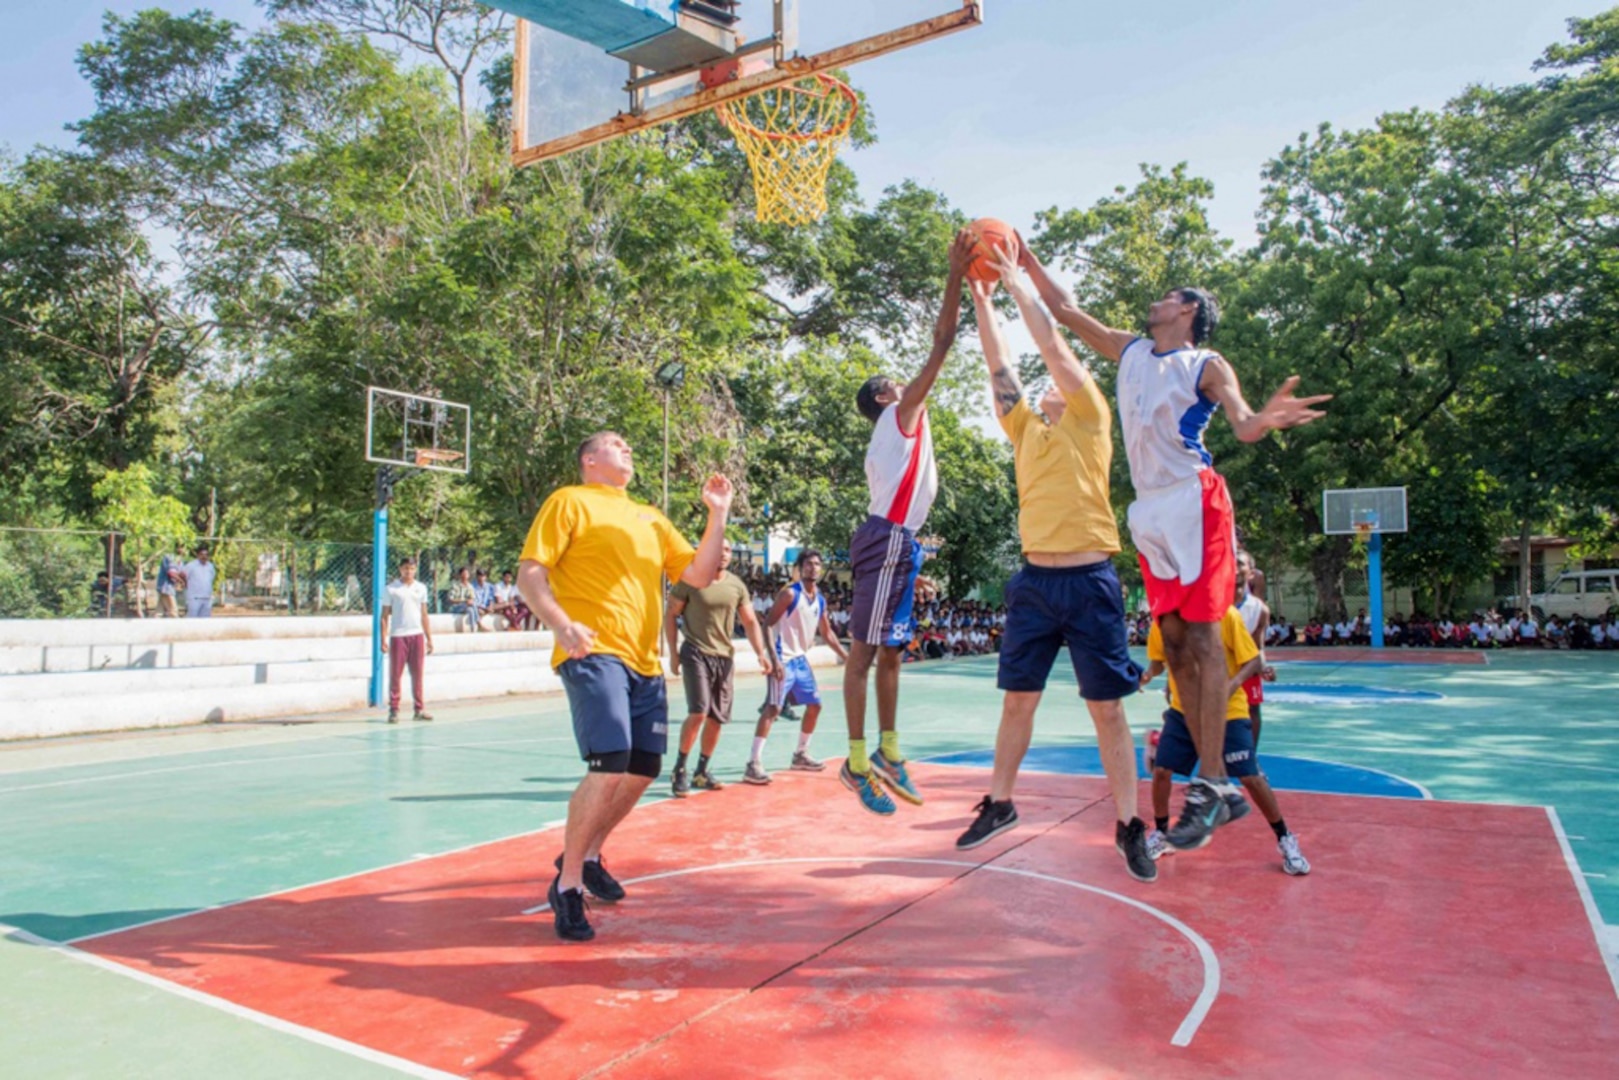 Nimitz Carrier Strike Group Sailors play basketball against students from the YMCA College of Physical Education in Chennai, India while participating in a community relations project during Malabar 2017. Malabar 2017 is the latest in a continuing series of exercises between the Indian Navy, Japan Maritime Self Defense Force and U.S. Navy that has grown in scope and complexity over the years to address the variety of shared threats to maritime security in the Indo-Asia-Pacific region. 